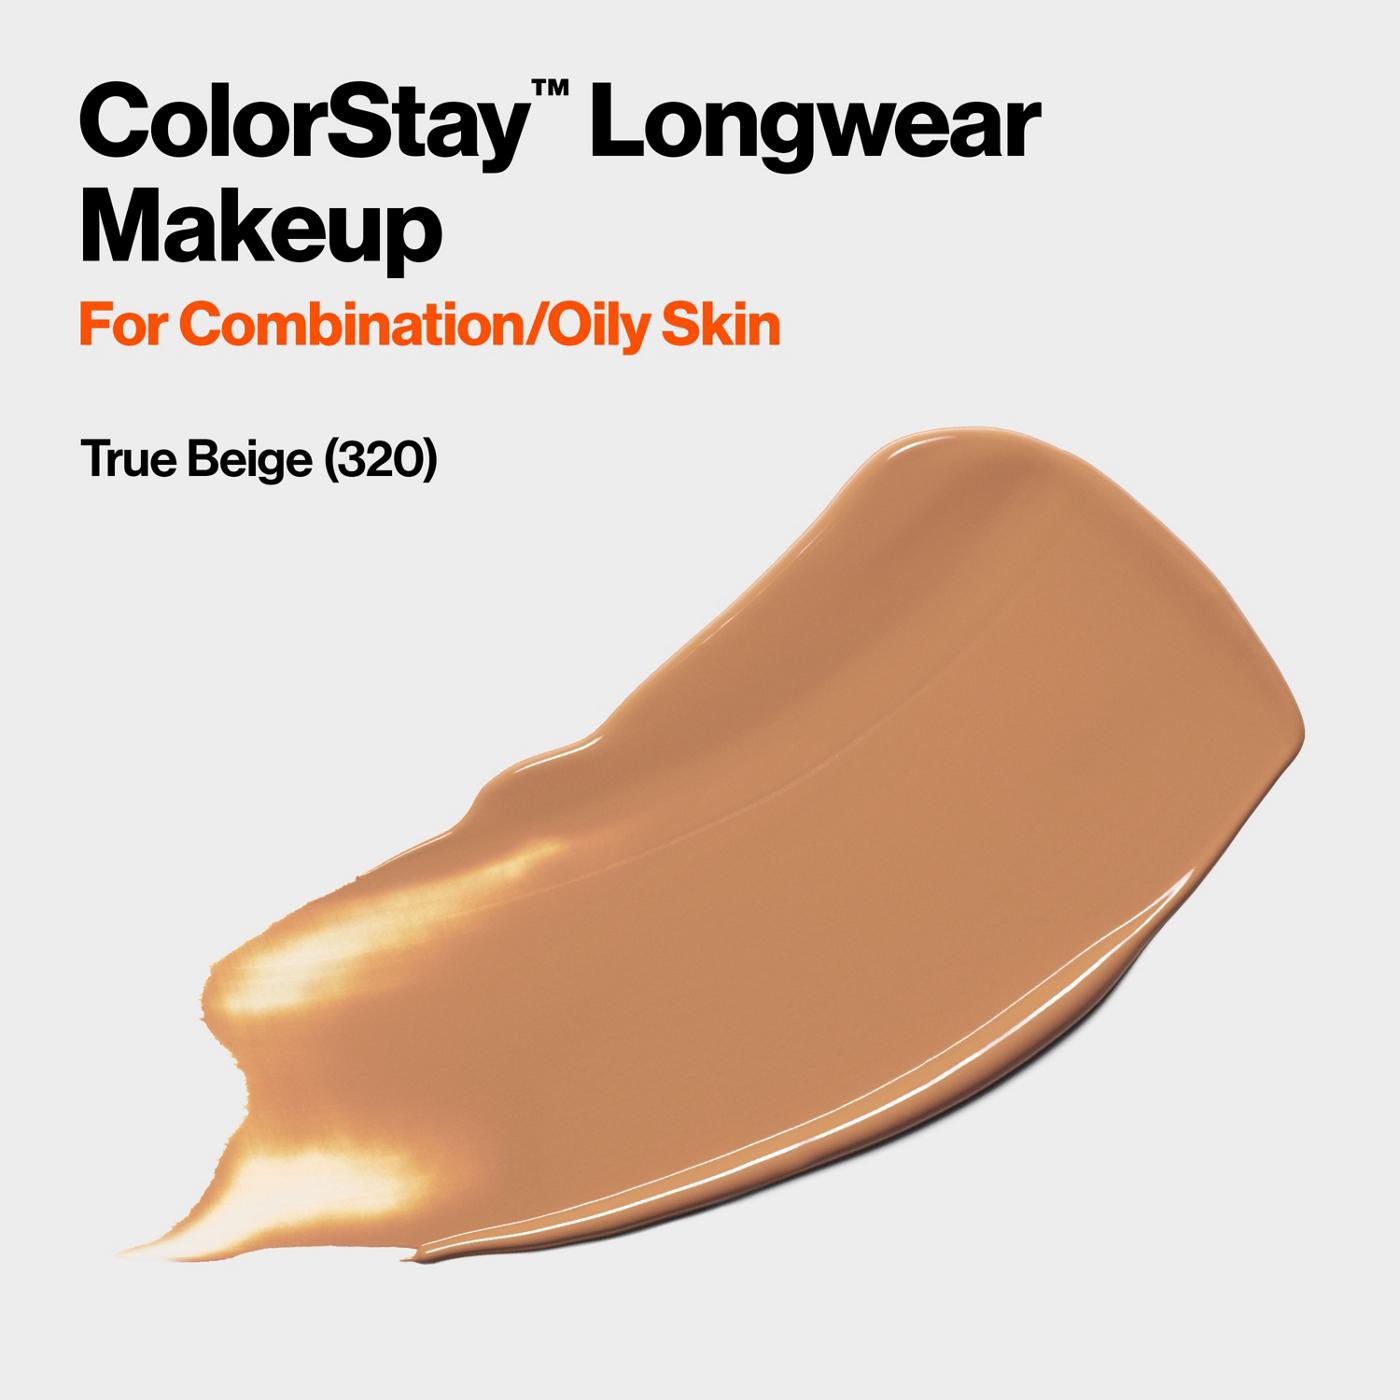 Revlon ColorStay Foundation for Combination/Oily Skin, 320 True Beige; image 4 of 5